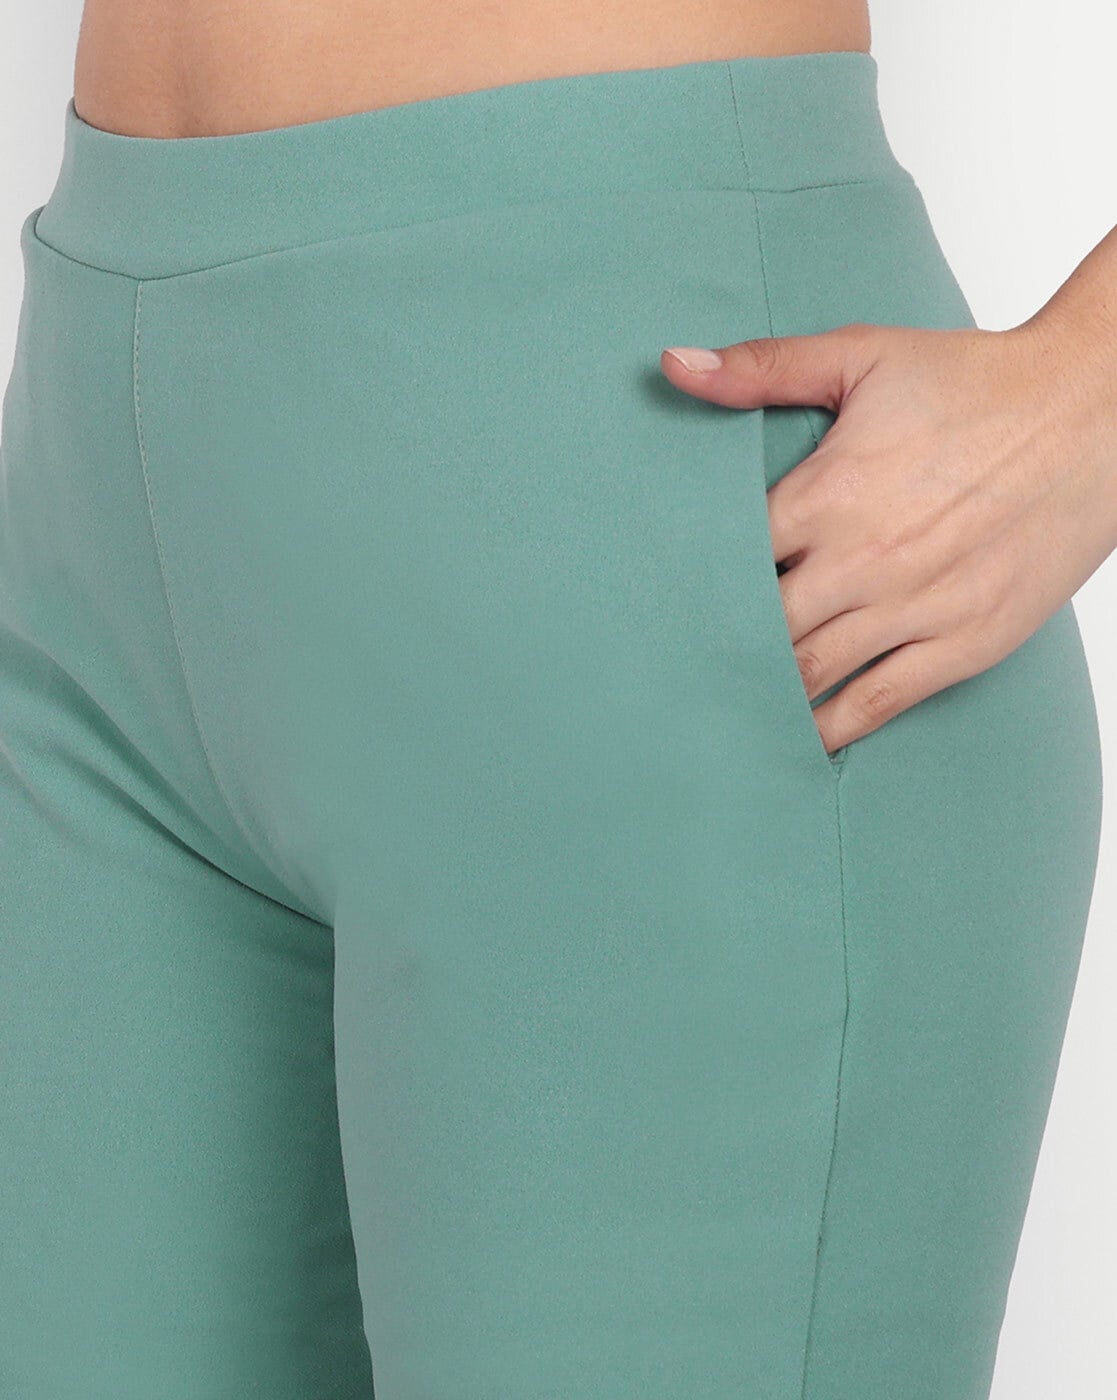 Pull-on trousers - Turquoise/Patterned - Ladies | H&M IN